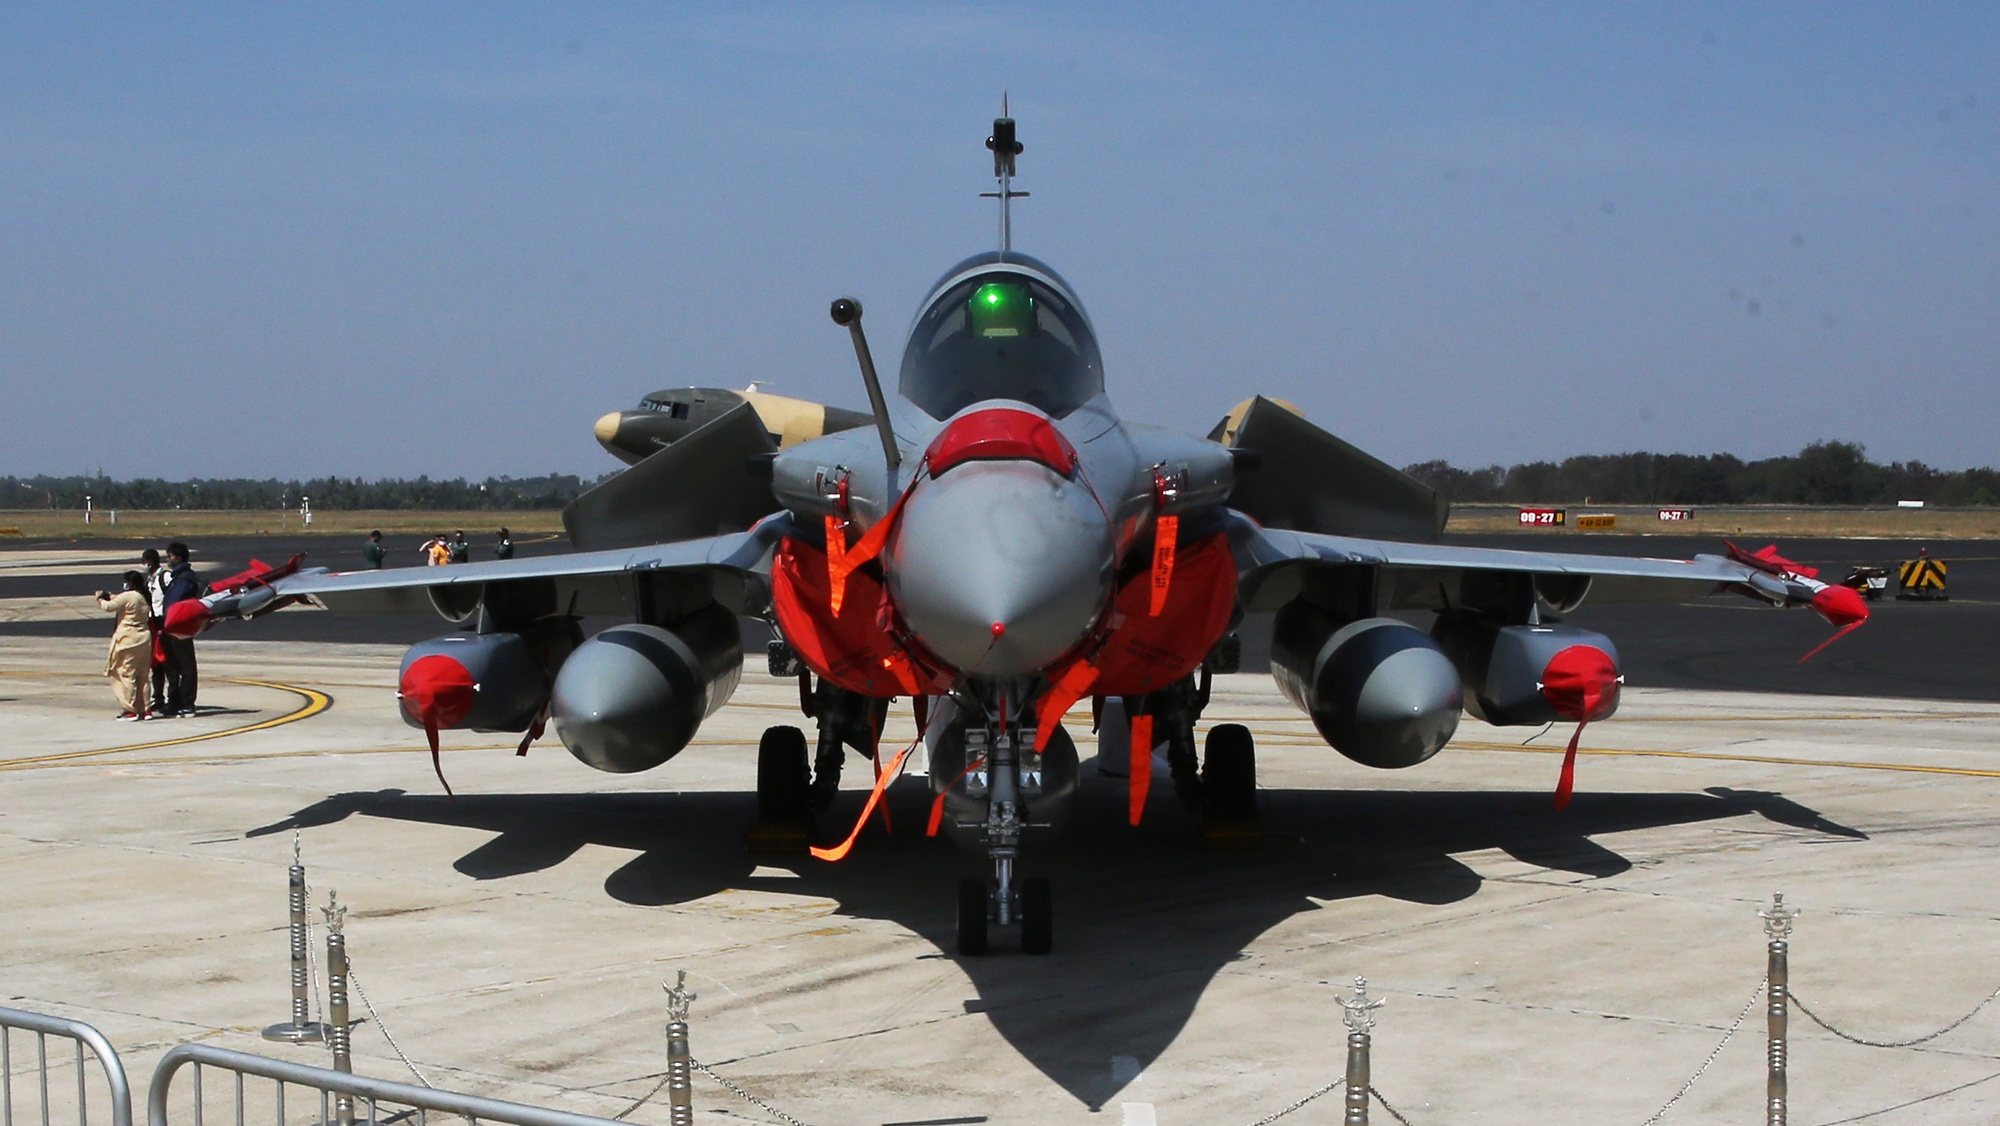 epa08986954 A Dassault Aviation &#039;Rafale&#039; fighter jet of the Indian Air Force is on display during the Aero India 2021 at the Yelahanka Air Force base in Bangalore, India, 04 February 2021. More than 500 international defense and aerospace companies have confirmed their participation in the 13th edition of the Aero India event that showcases warfare equipment including new fighterplanes, next-generation submarines, warships, helicopters, missiles, howitzers, air defense systems, assault weapons and all kind of military gear from 03 to 05 February 2021.  EPA/JAGADEESH NV